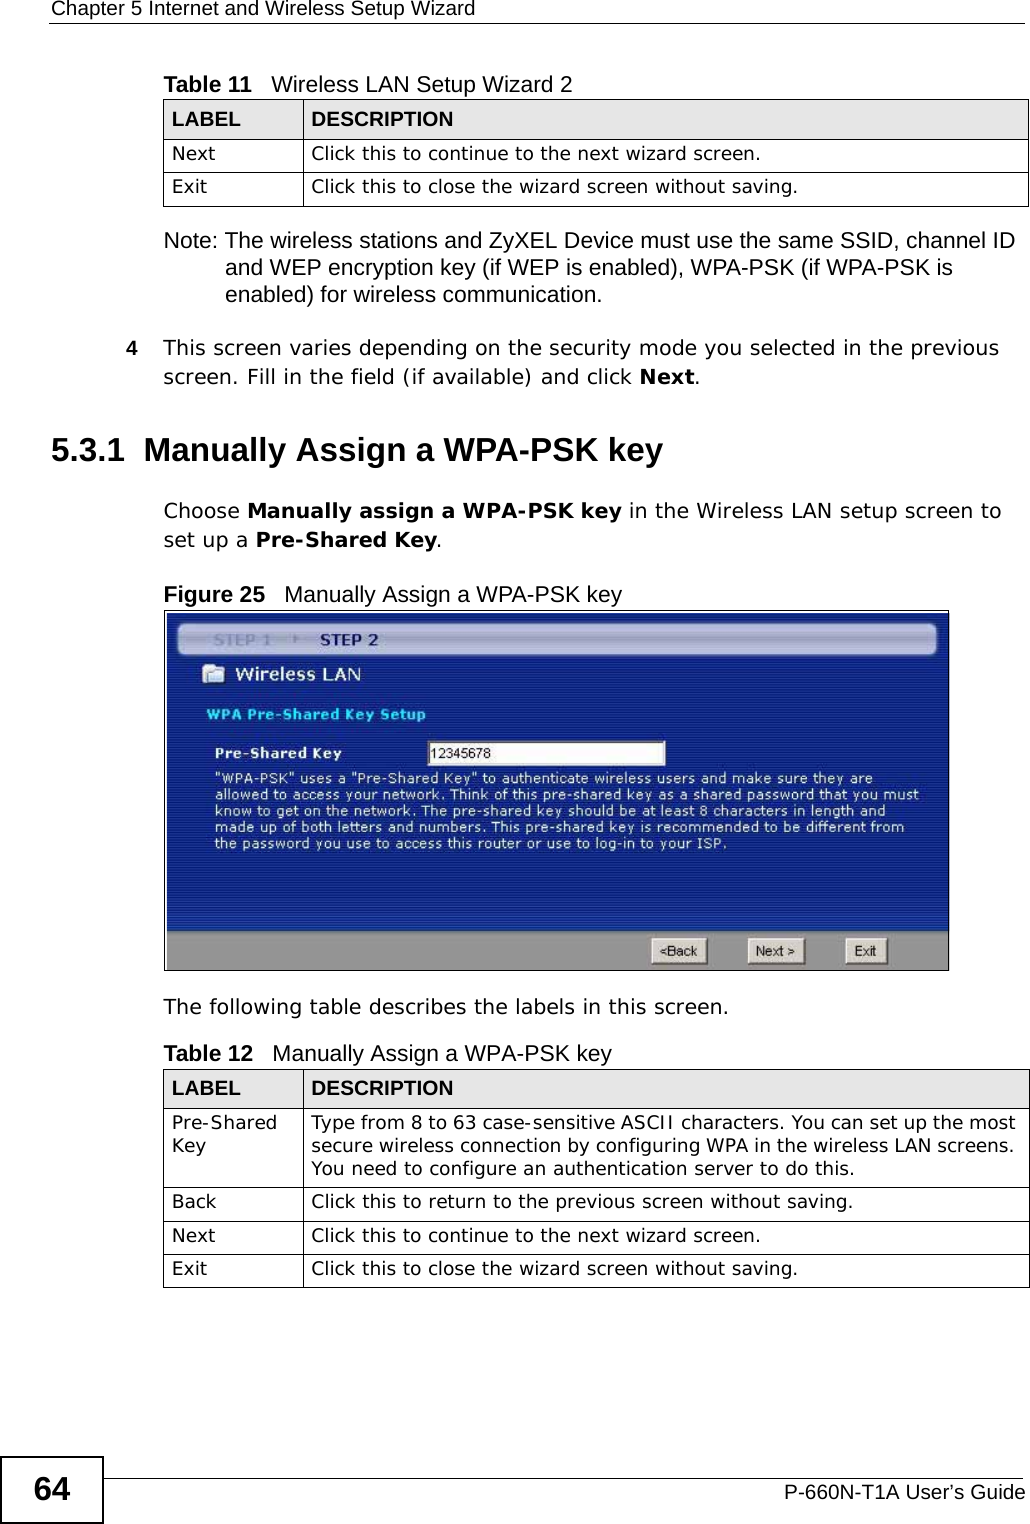 Chapter 5 Internet and Wireless Setup WizardP-660N-T1A User’s Guide64Note: The wireless stations and ZyXEL Device must use the same SSID, channel ID and WEP encryption key (if WEP is enabled), WPA-PSK (if WPA-PSK is enabled) for wireless communication.4This screen varies depending on the security mode you selected in the previous screen. Fill in the field (if available) and click Next.5.3.1  Manually Assign a WPA-PSK keyChoose Manually assign a WPA-PSK key in the Wireless LAN setup screen to set up a Pre-Shared Key.Figure 25   Manually Assign a WPA-PSK keyThe following table describes the labels in this screen. Next Click this to continue to the next wizard screen.Exit Click this to close the wizard screen without saving.Table 11   Wireless LAN Setup Wizard 2LABEL DESCRIPTIONTable 12   Manually Assign a WPA-PSK keyLABEL DESCRIPTIONPre-Shared Key Type from 8 to 63 case-sensitive ASCII characters. You can set up the most secure wireless connection by configuring WPA in the wireless LAN screens. You need to configure an authentication server to do this.Back Click this to return to the previous screen without saving.Next Click this to continue to the next wizard screen.Exit Click this to close the wizard screen without saving.